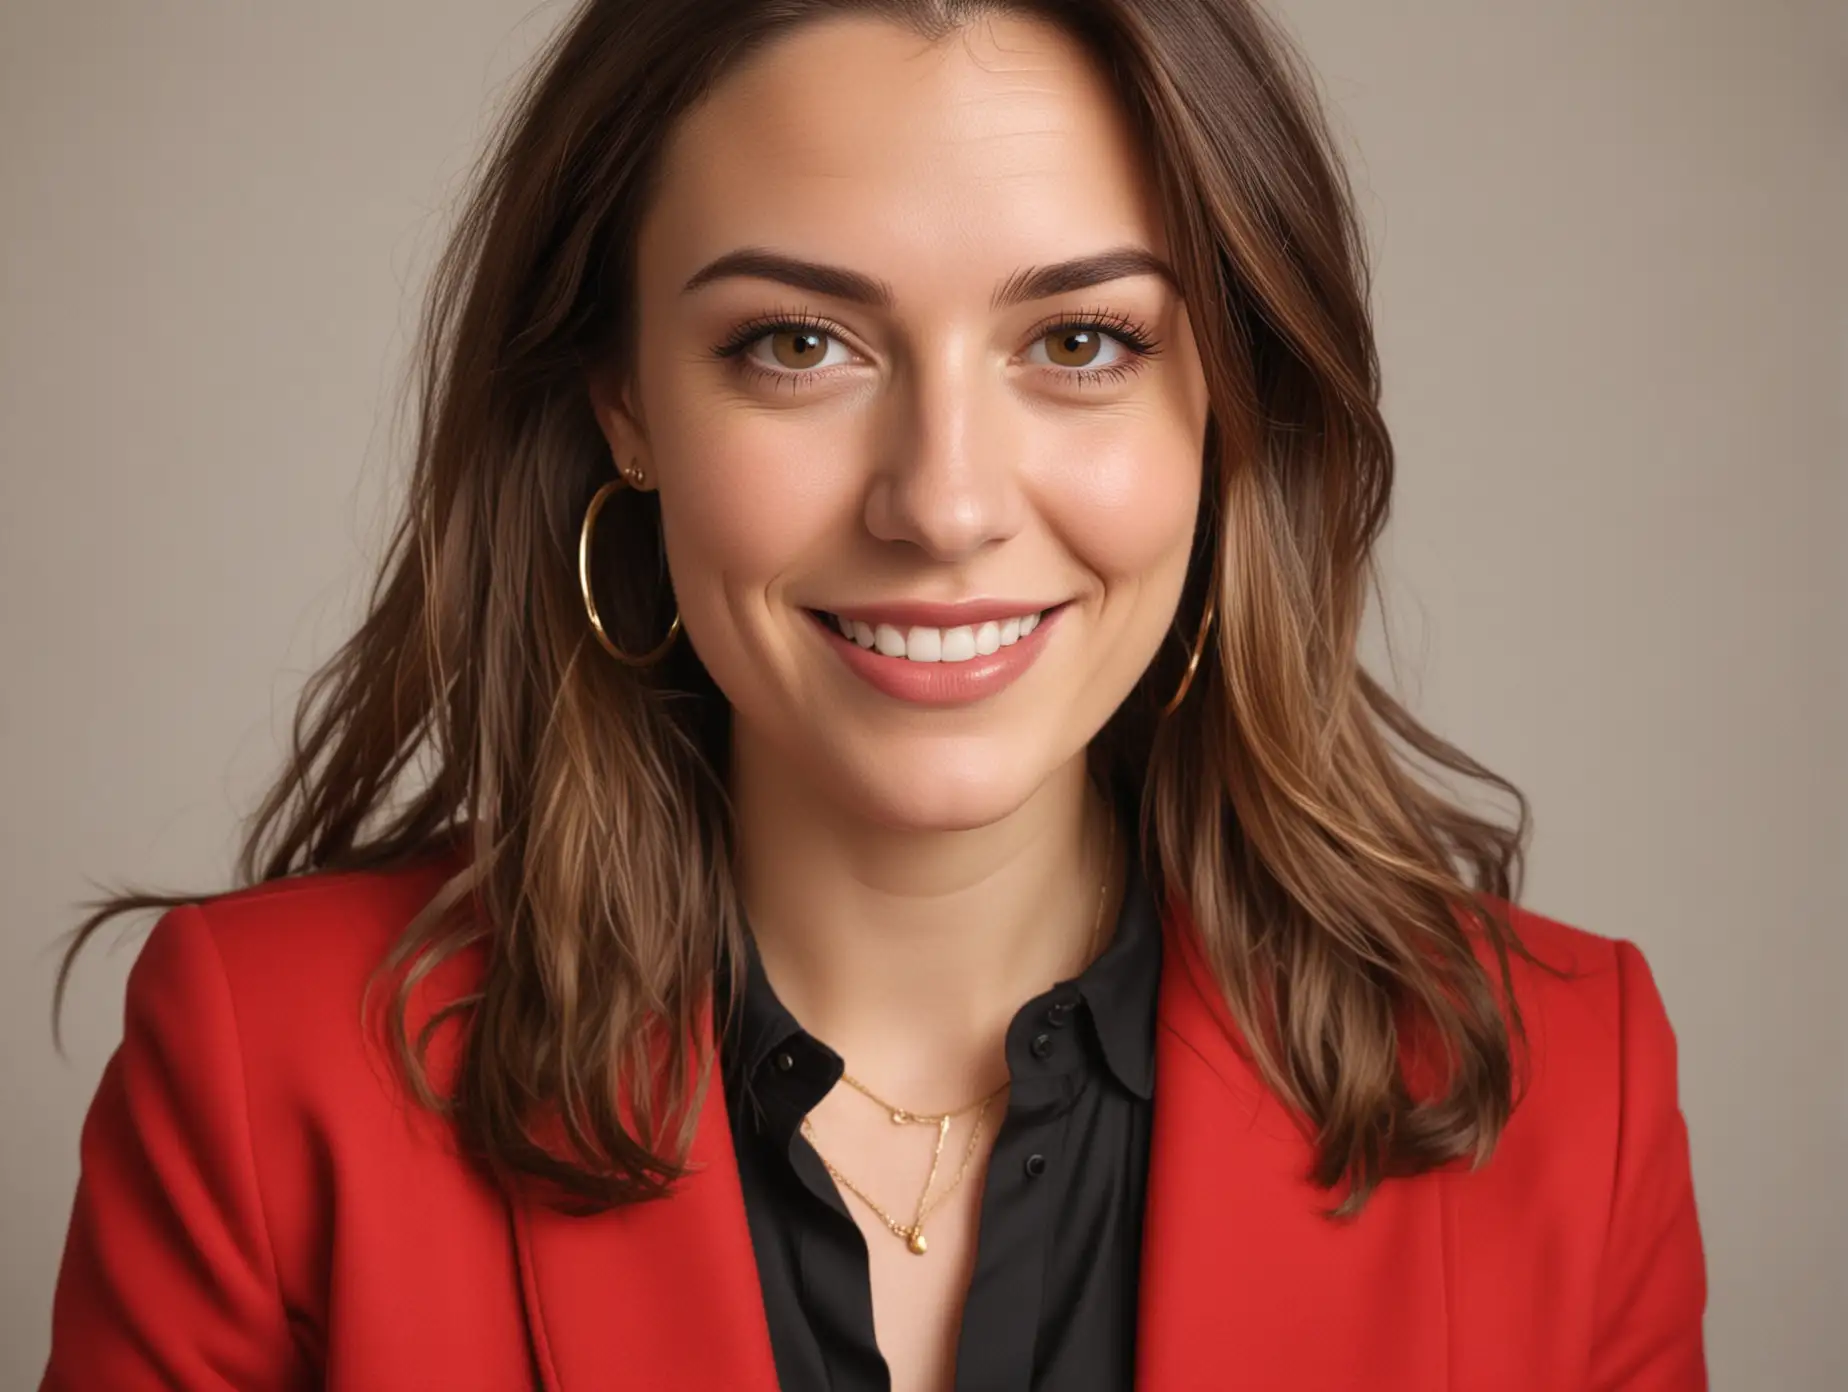 Portrait of a Cheerful 30YearOld Woman in Red Blazer and Hoop Earrings